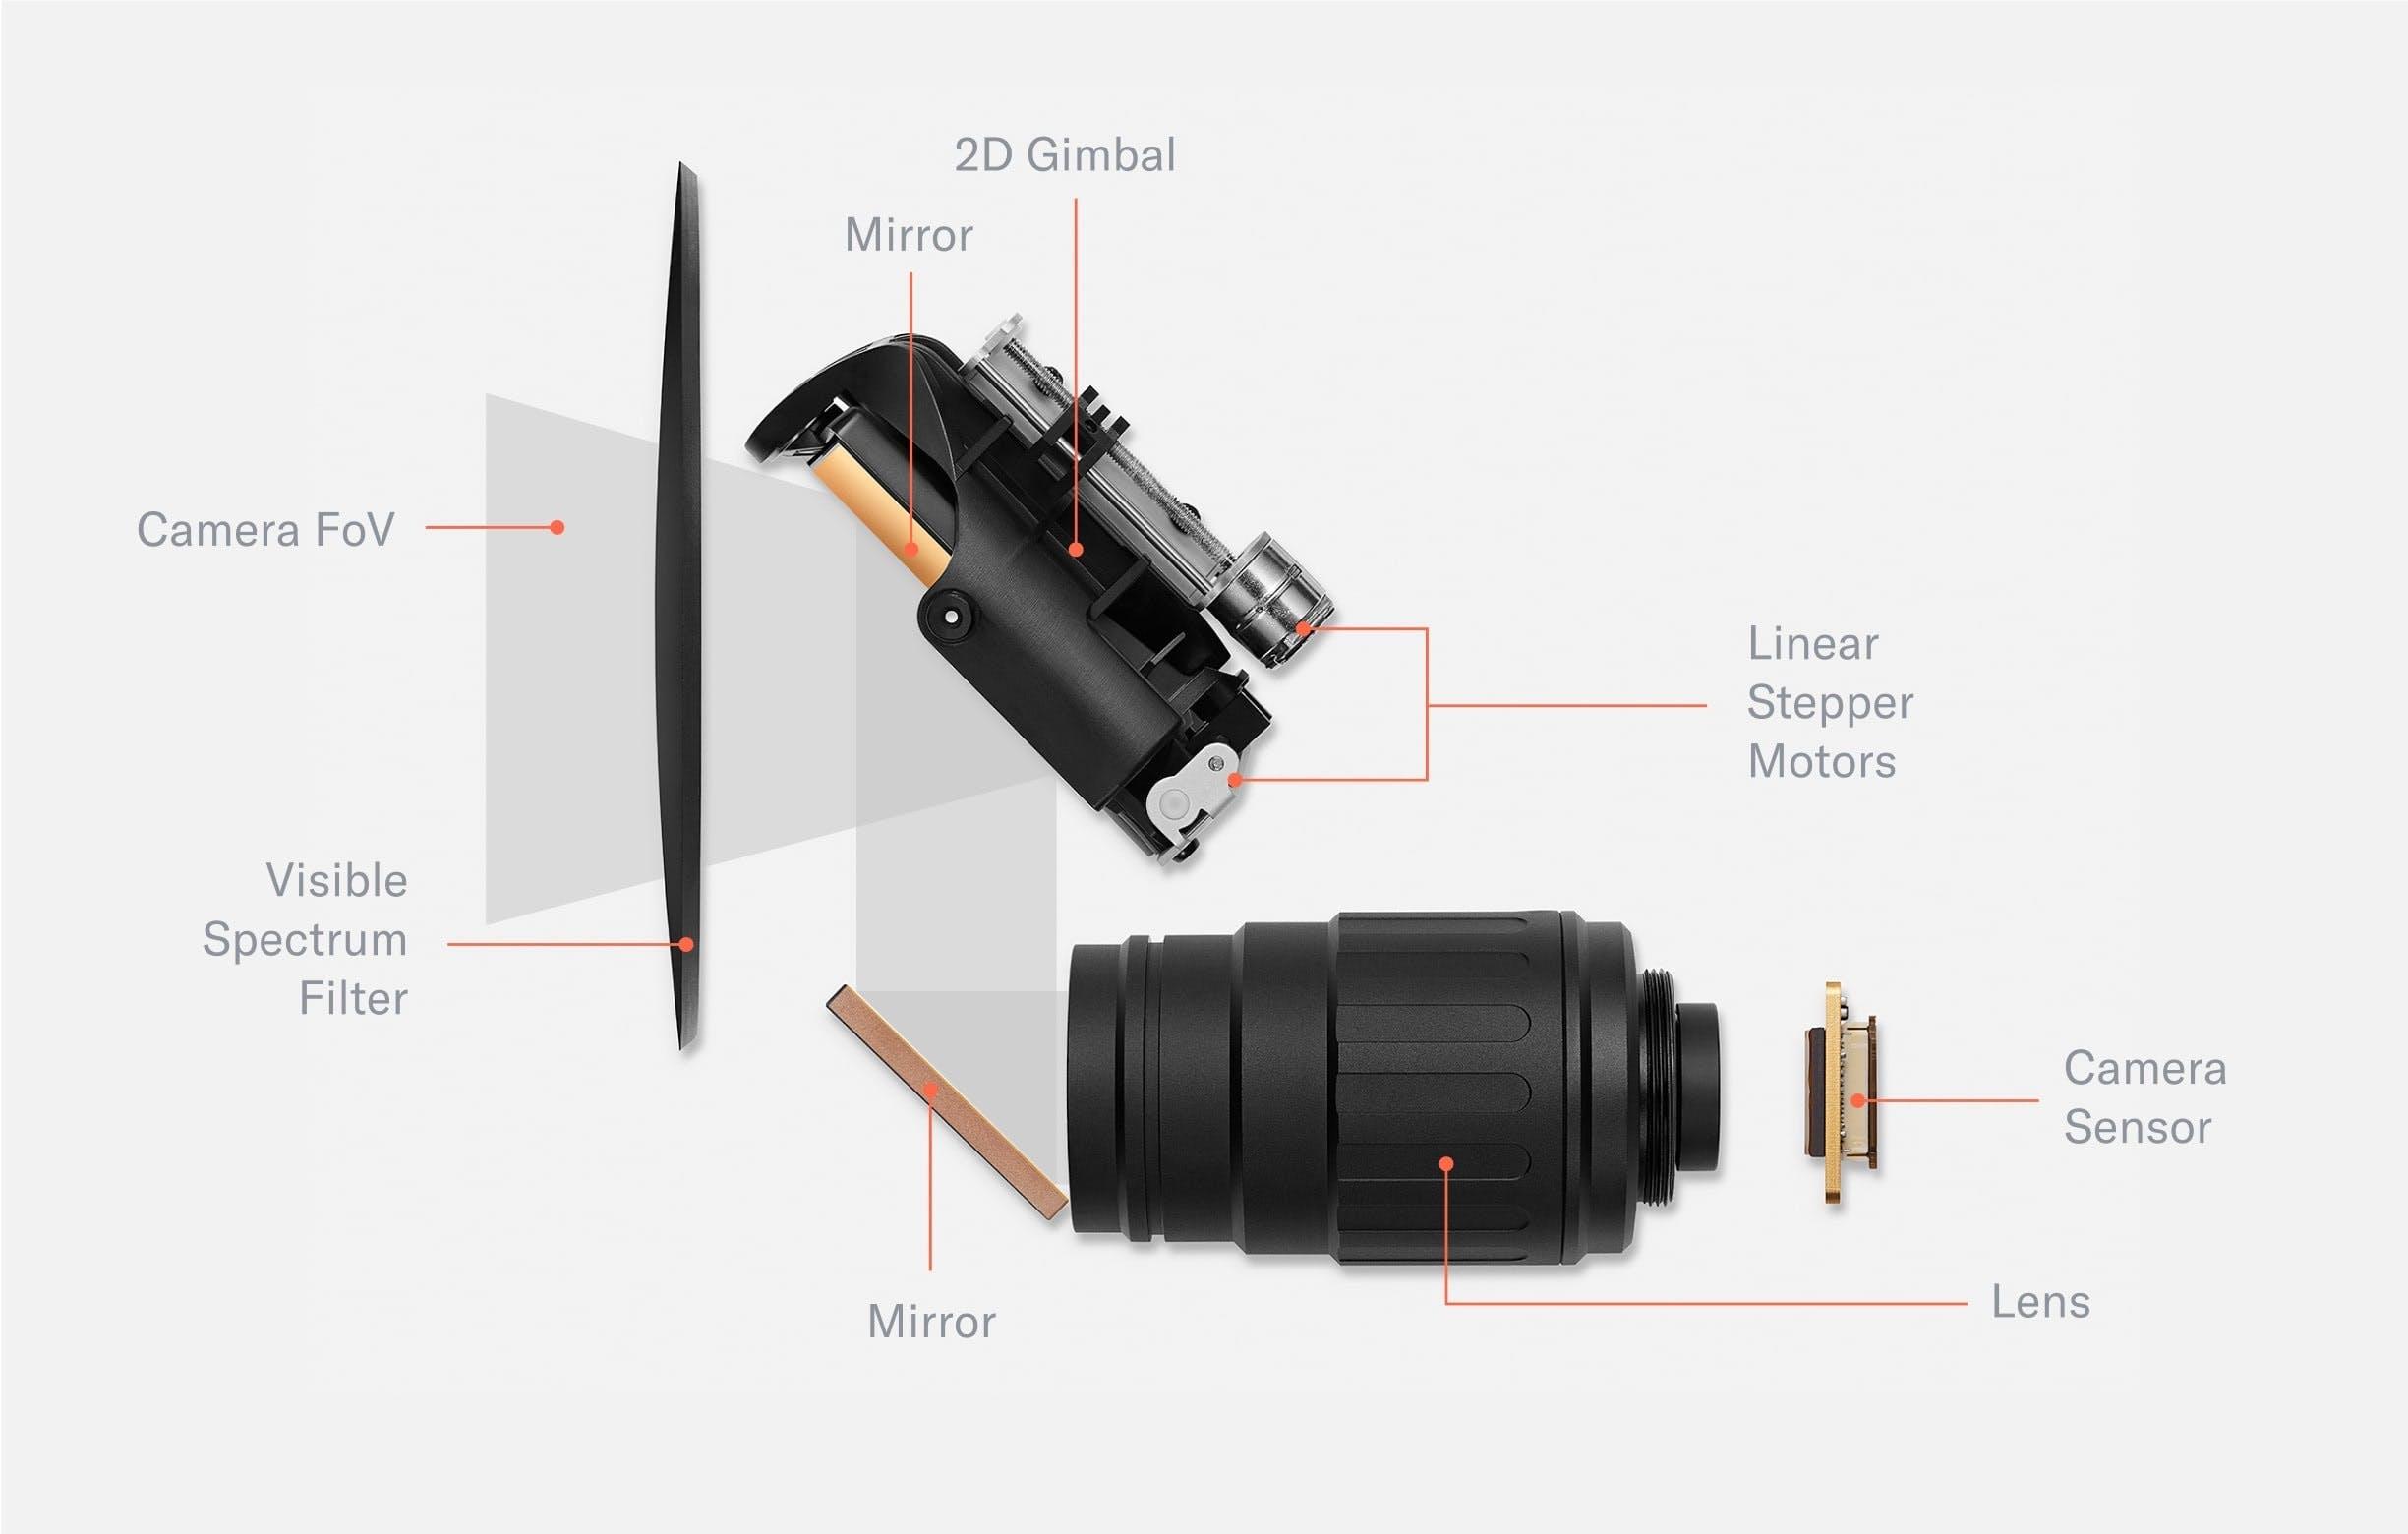 Figure 8: Telephoto lens and 2D gimbal